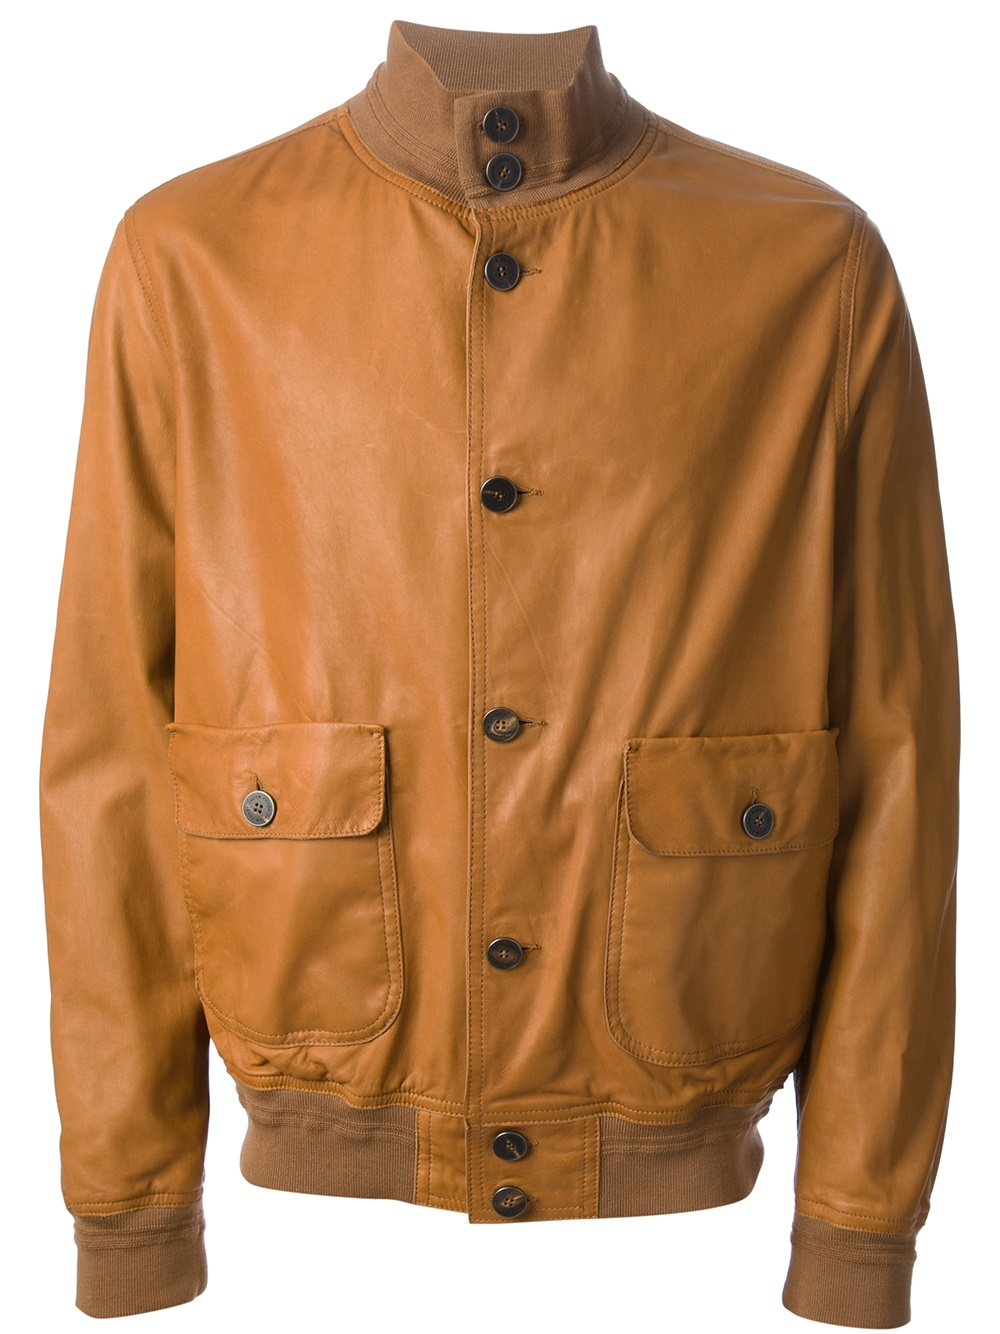 Jacob Cohen Button Up Jacket in Brown for Men - Lyst